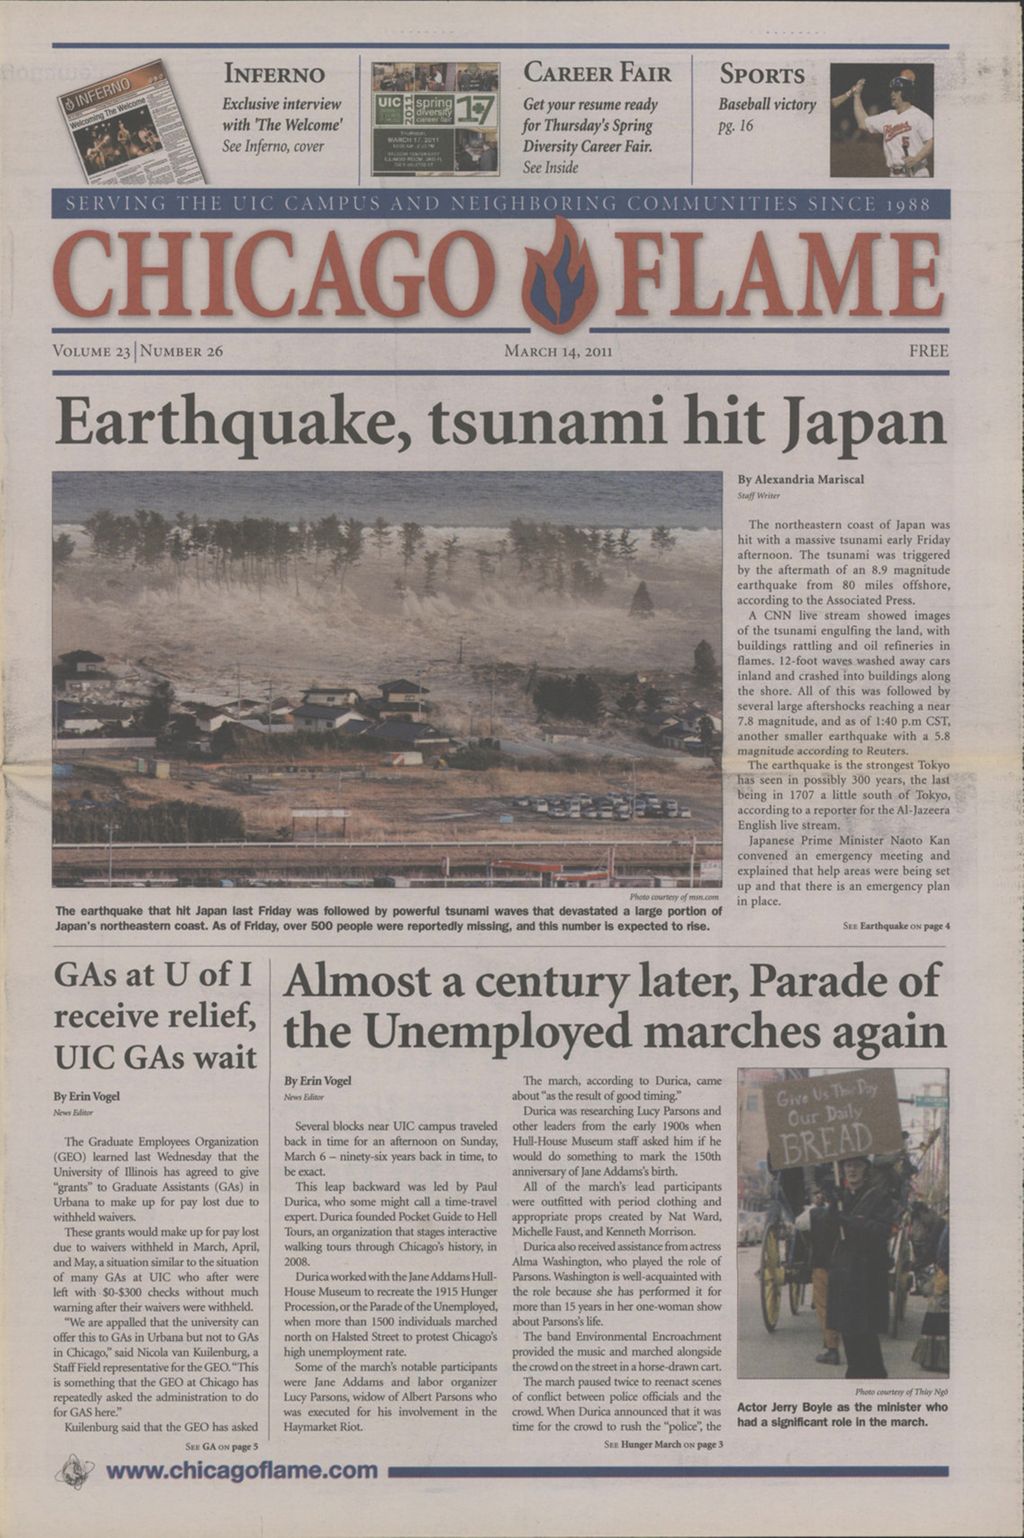 Chicago Flame (March 14, 2011)